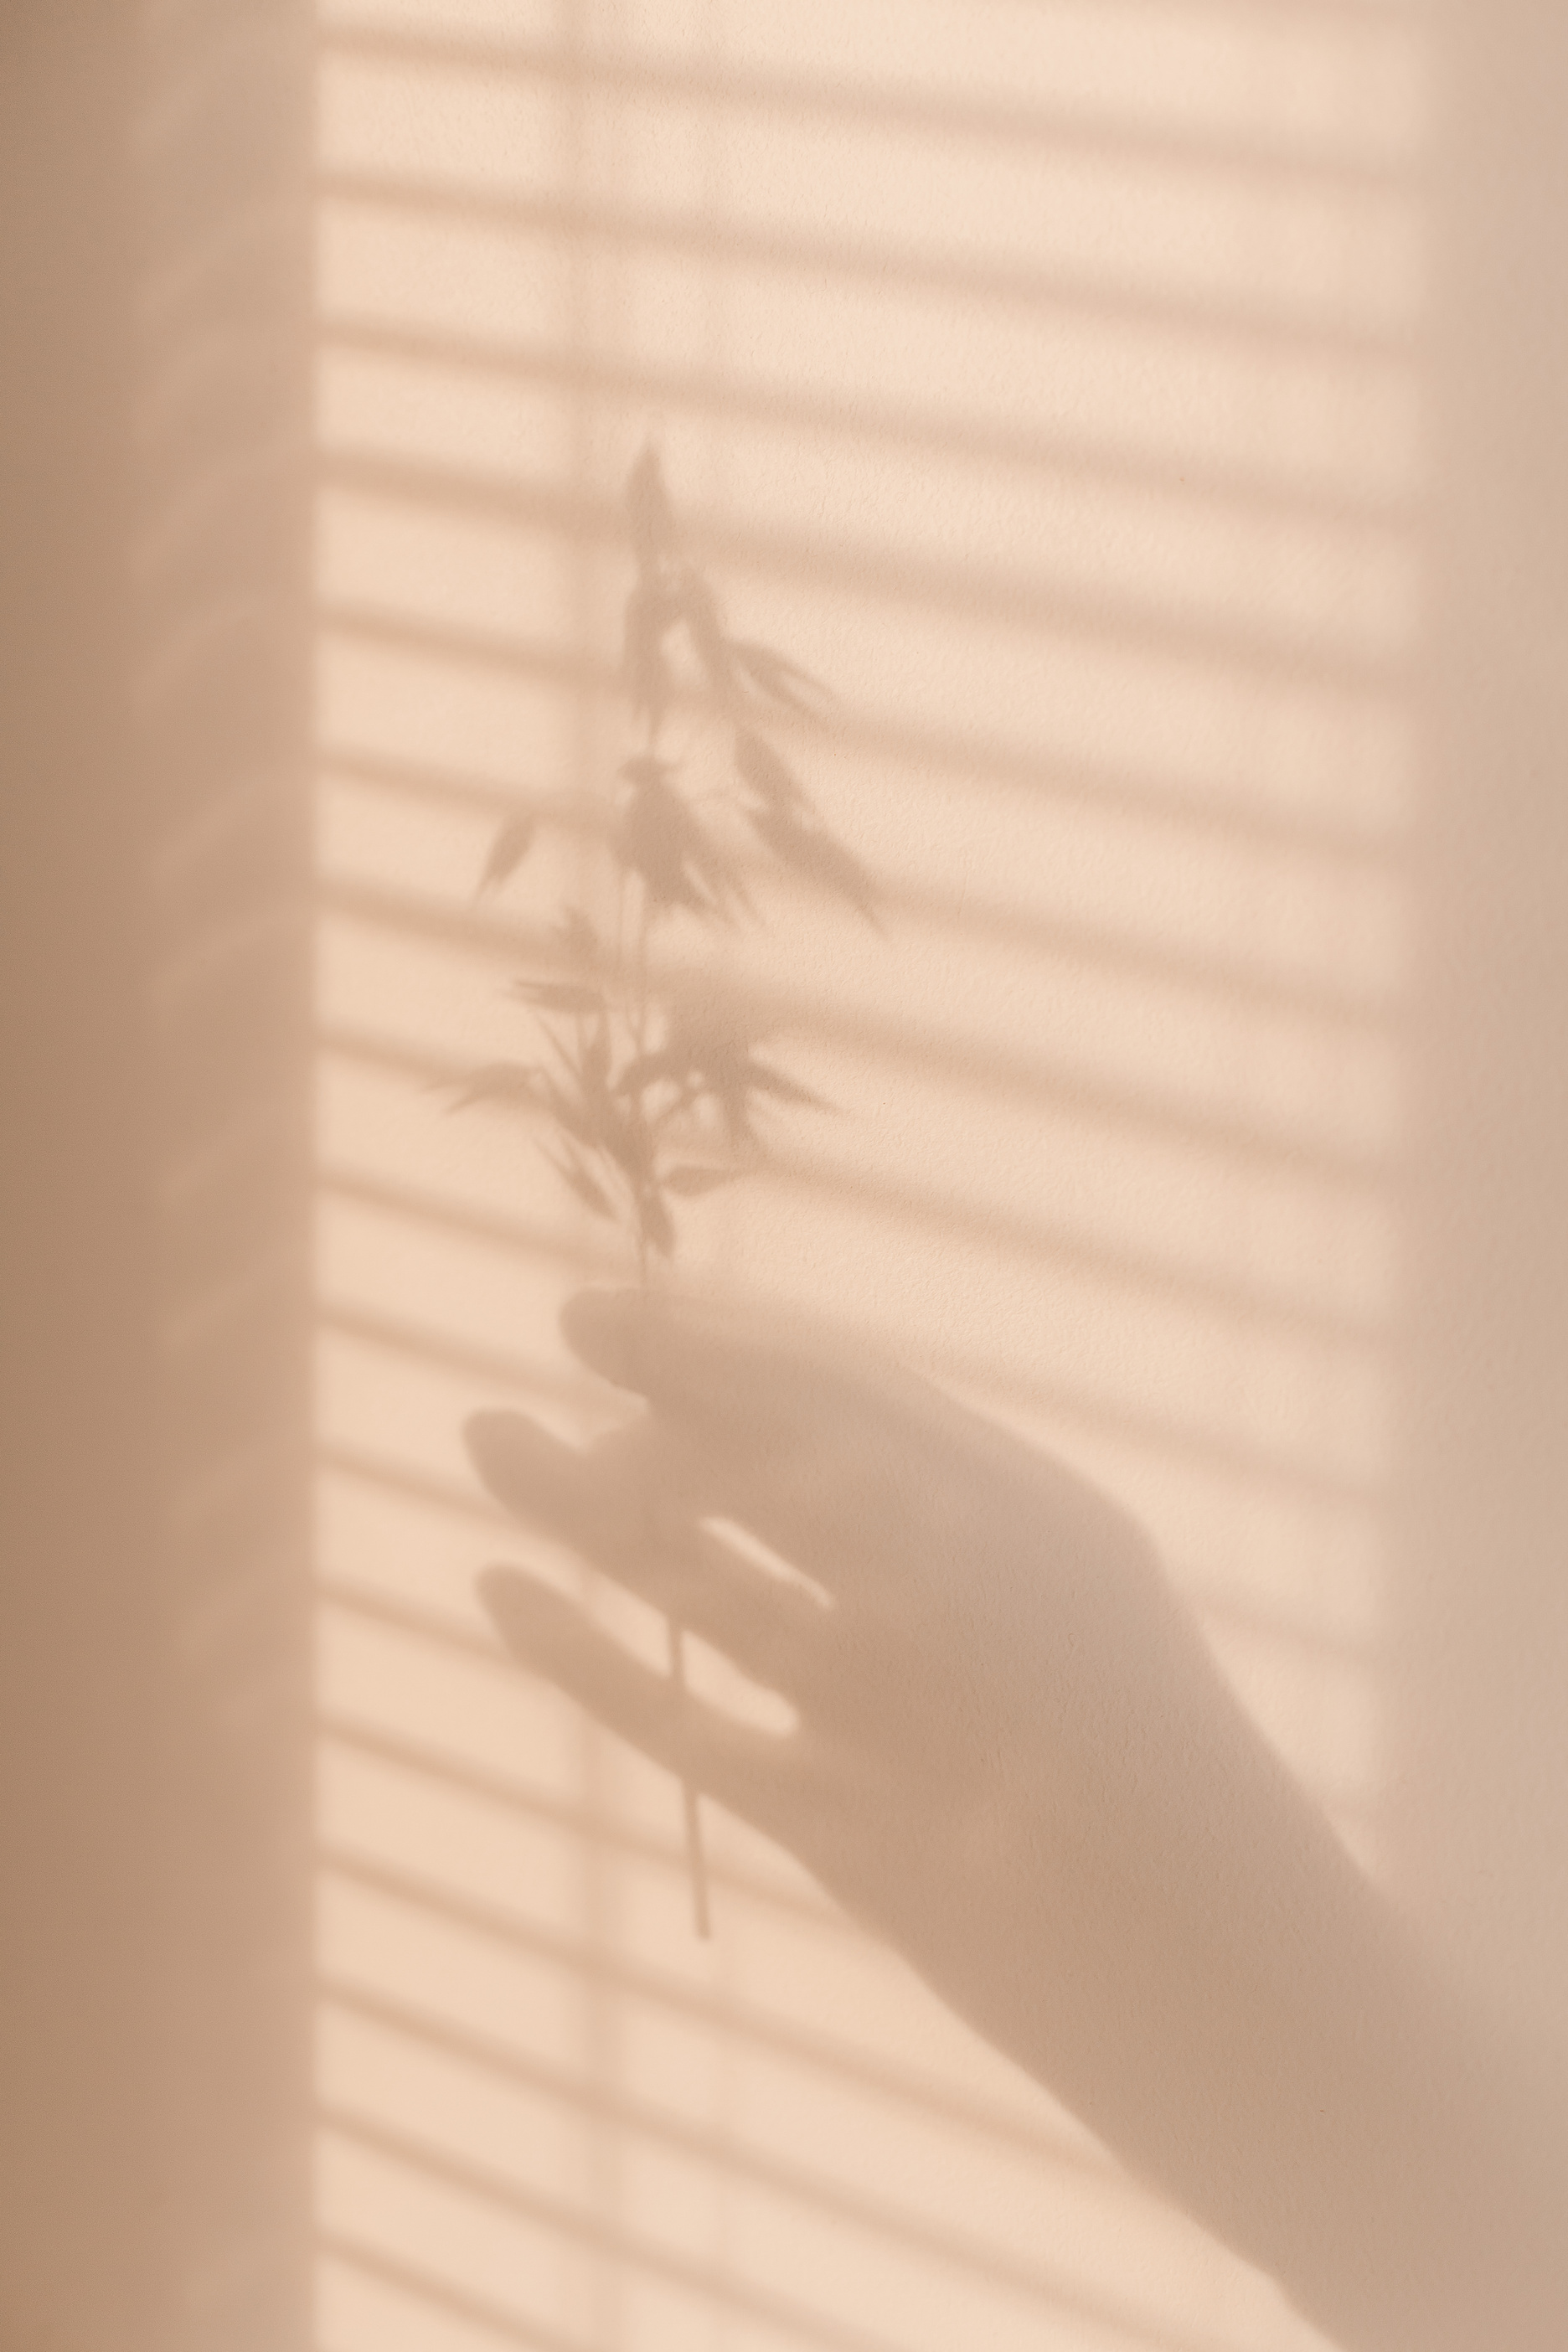 Shadow of Hand Holding Leaves on Beige Wall